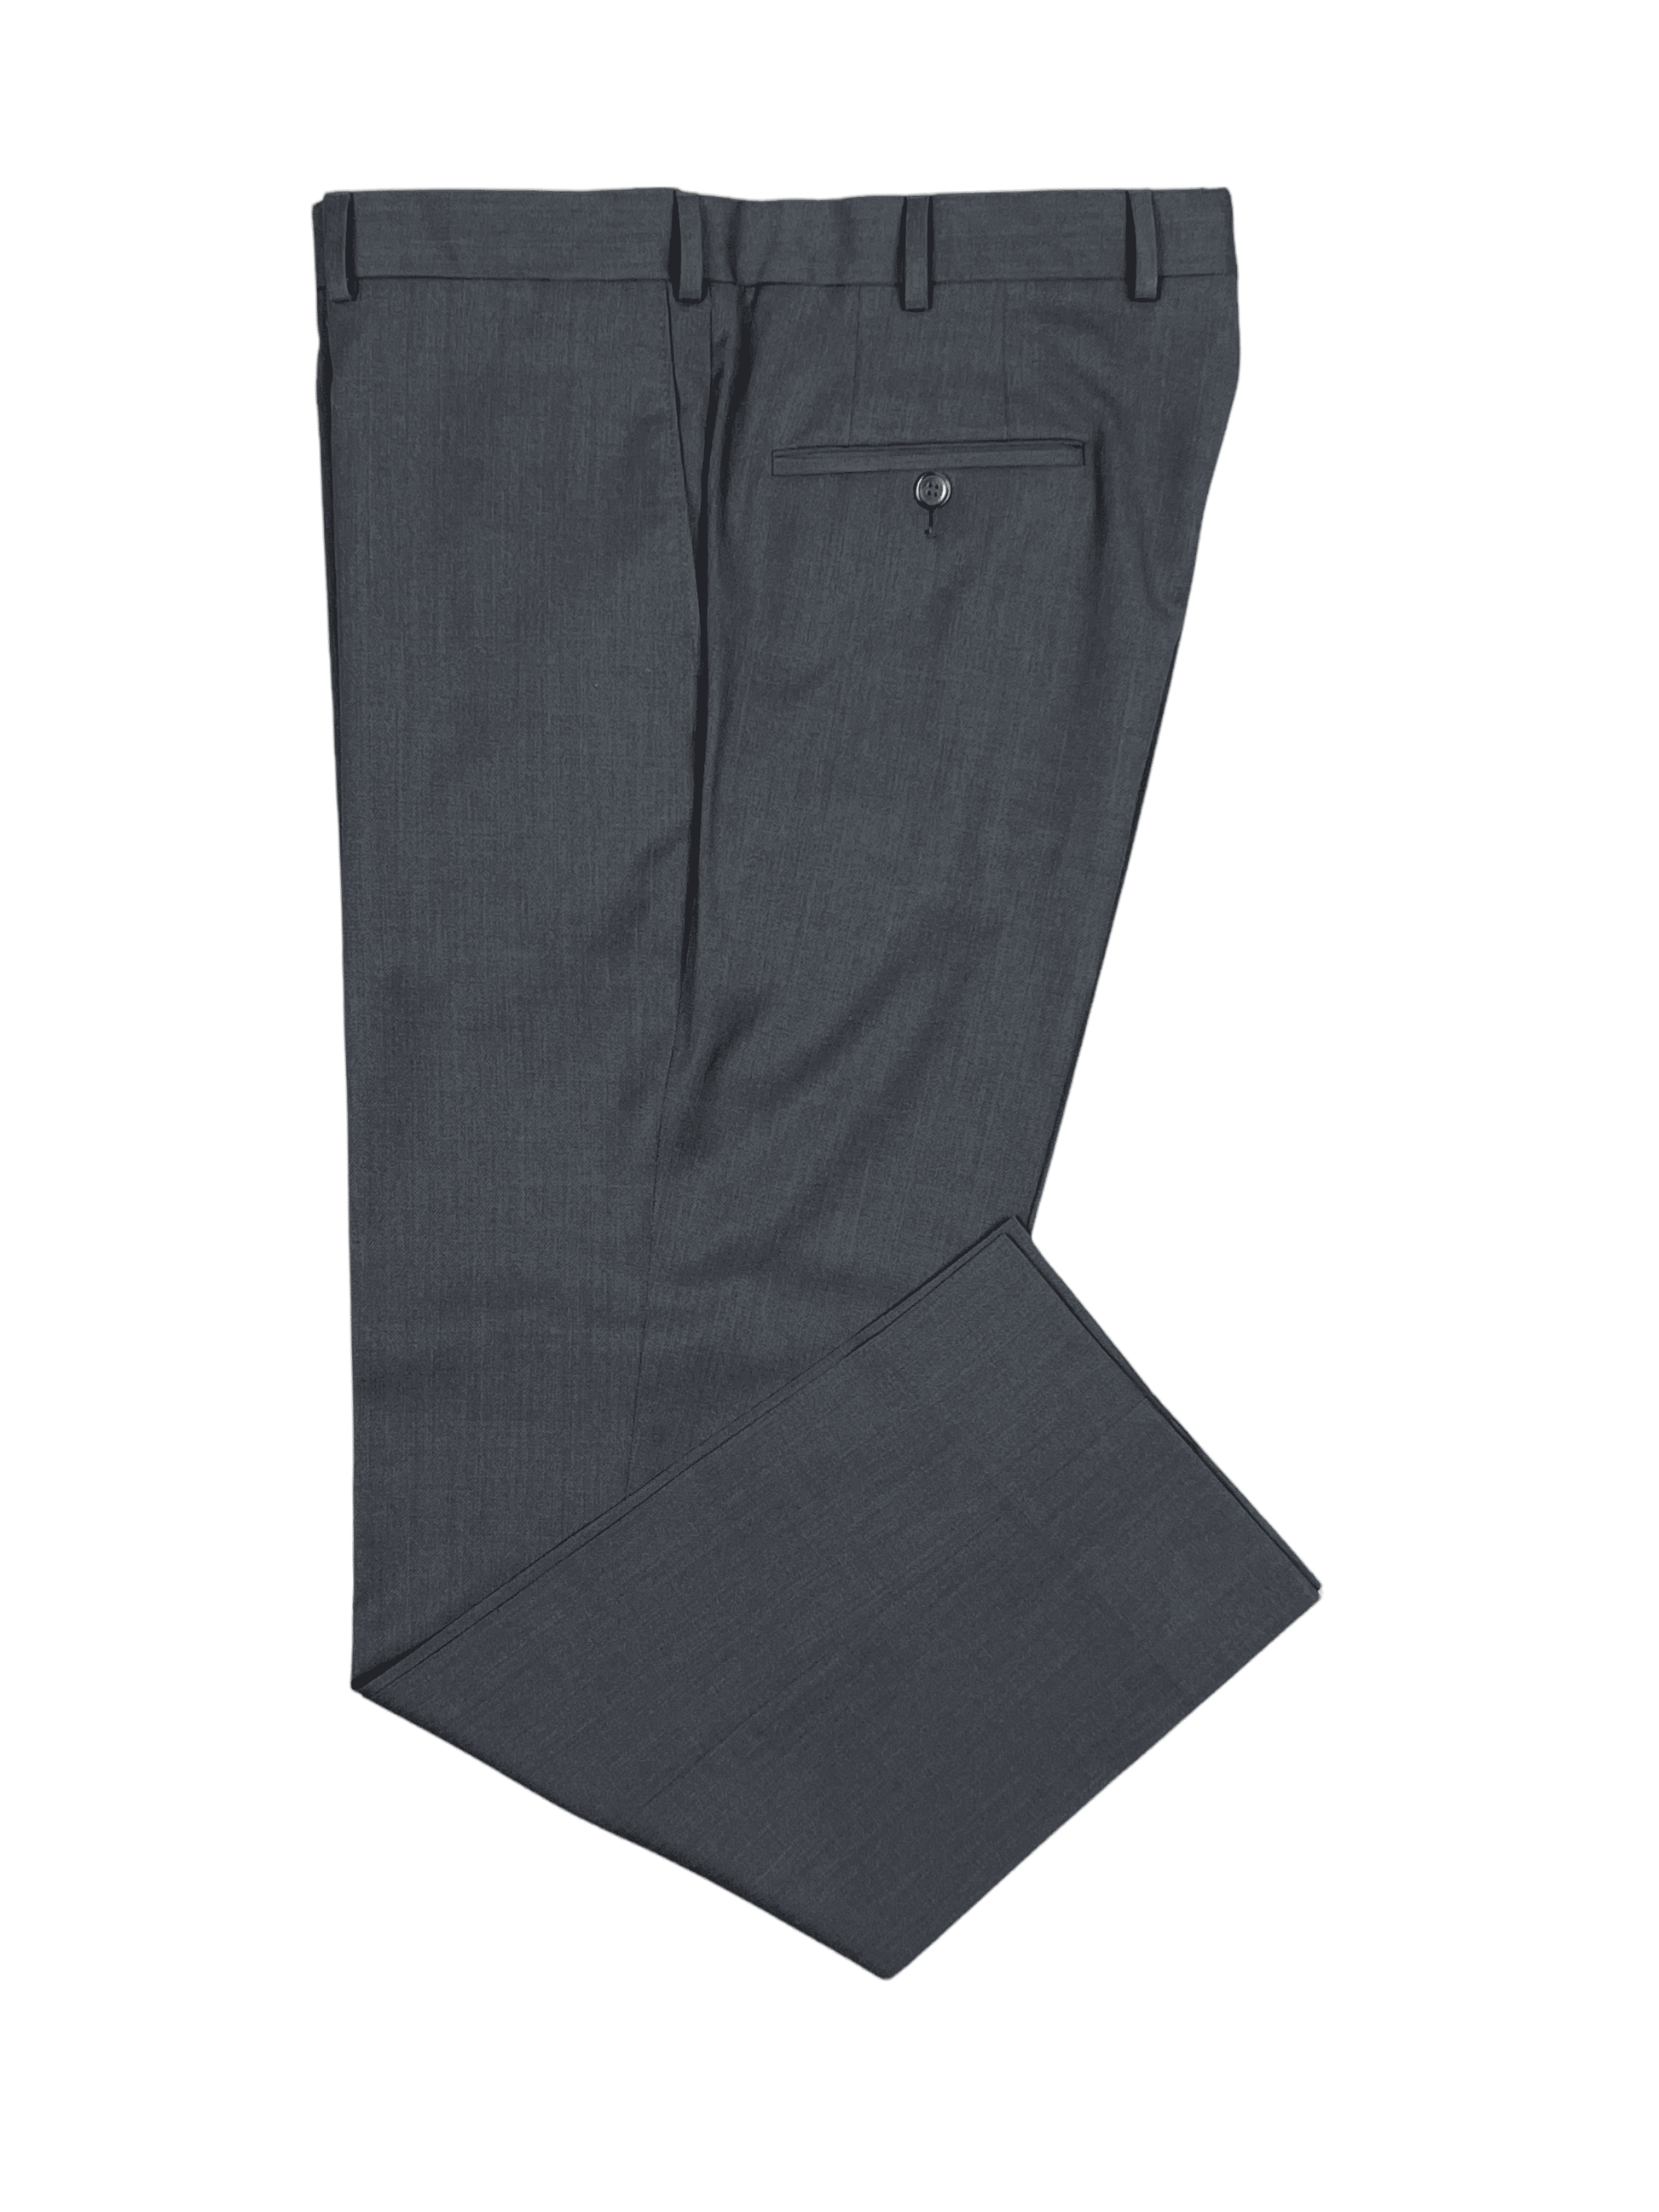 Samuelsohn Charcoal Wool Pants 40 x 32 - Genuine Design Luxury Consignment for Men. New & Pre-Owned Clothing, Shoes, & Accessories. Calgary, Canada